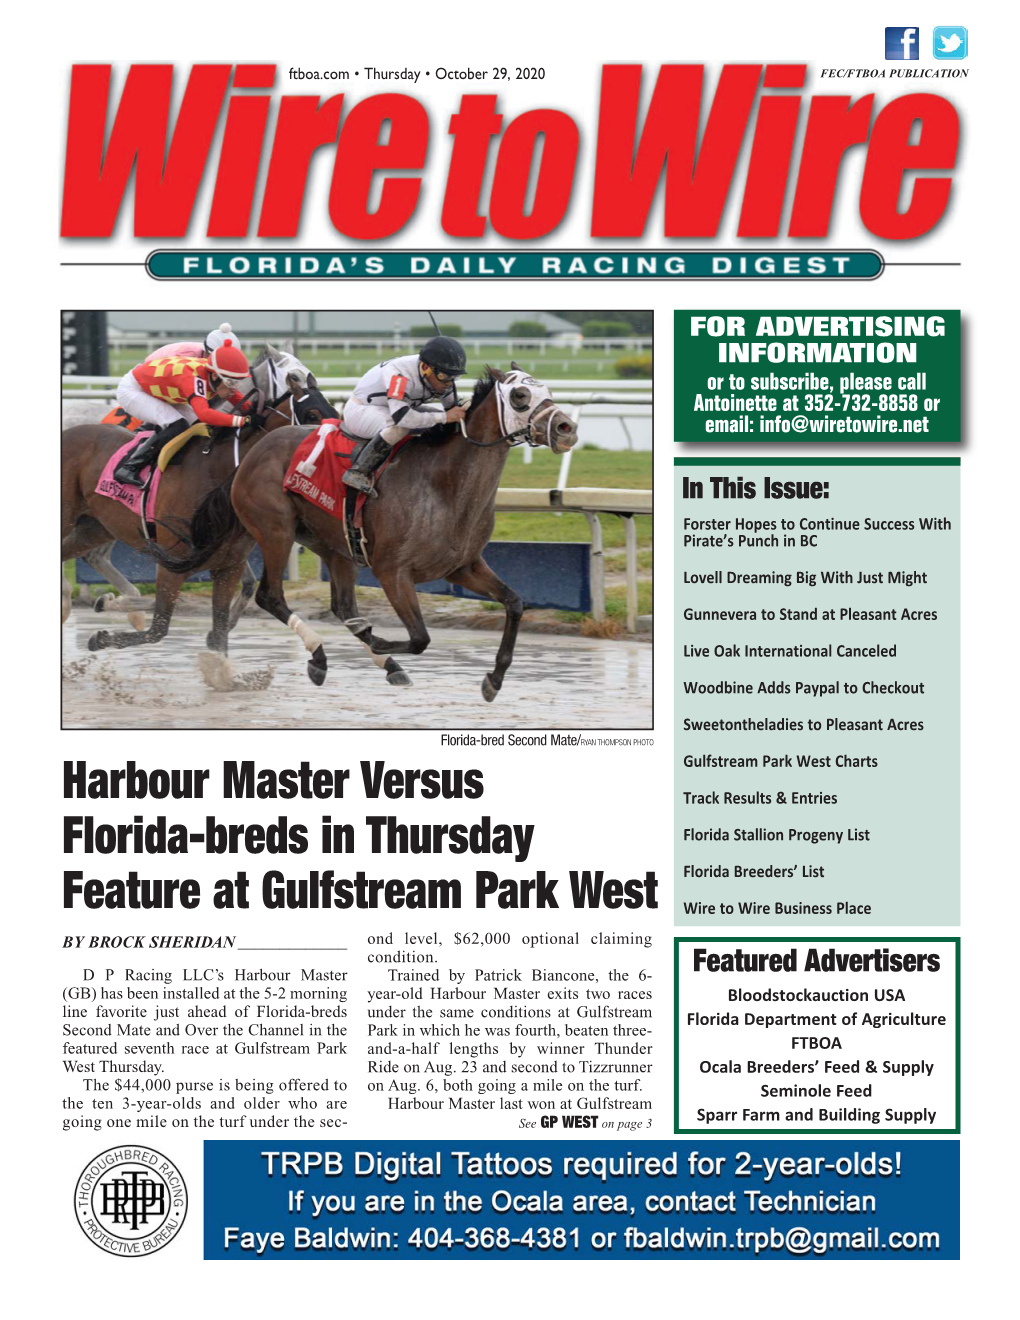 Harbour Master Versus Florida-Breds in Thursday Feature at Gulfstream